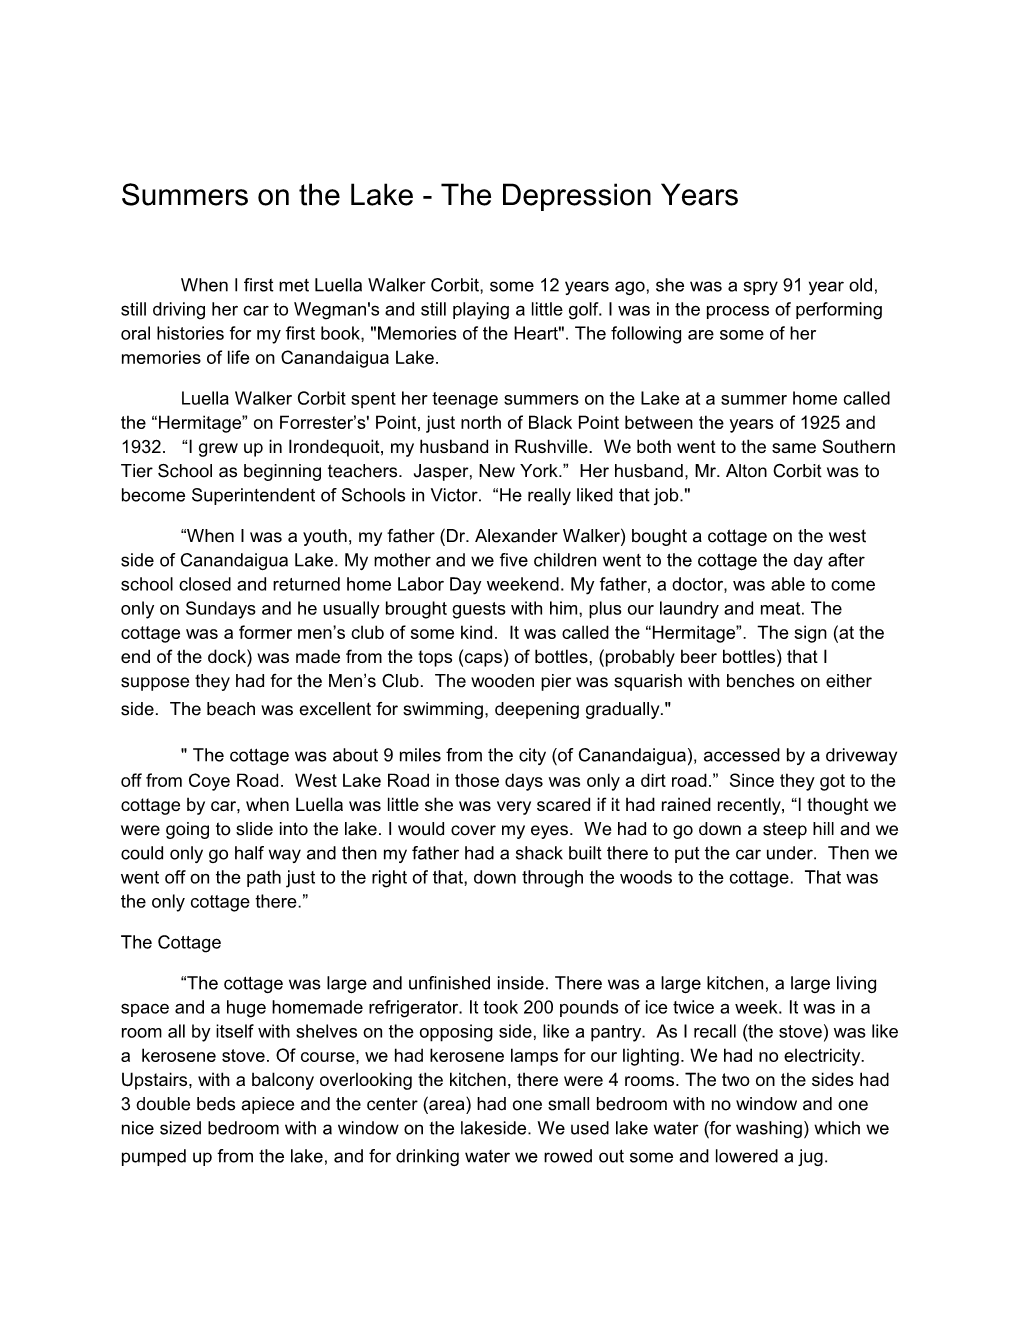 Summers on the Lake - the Depression Years